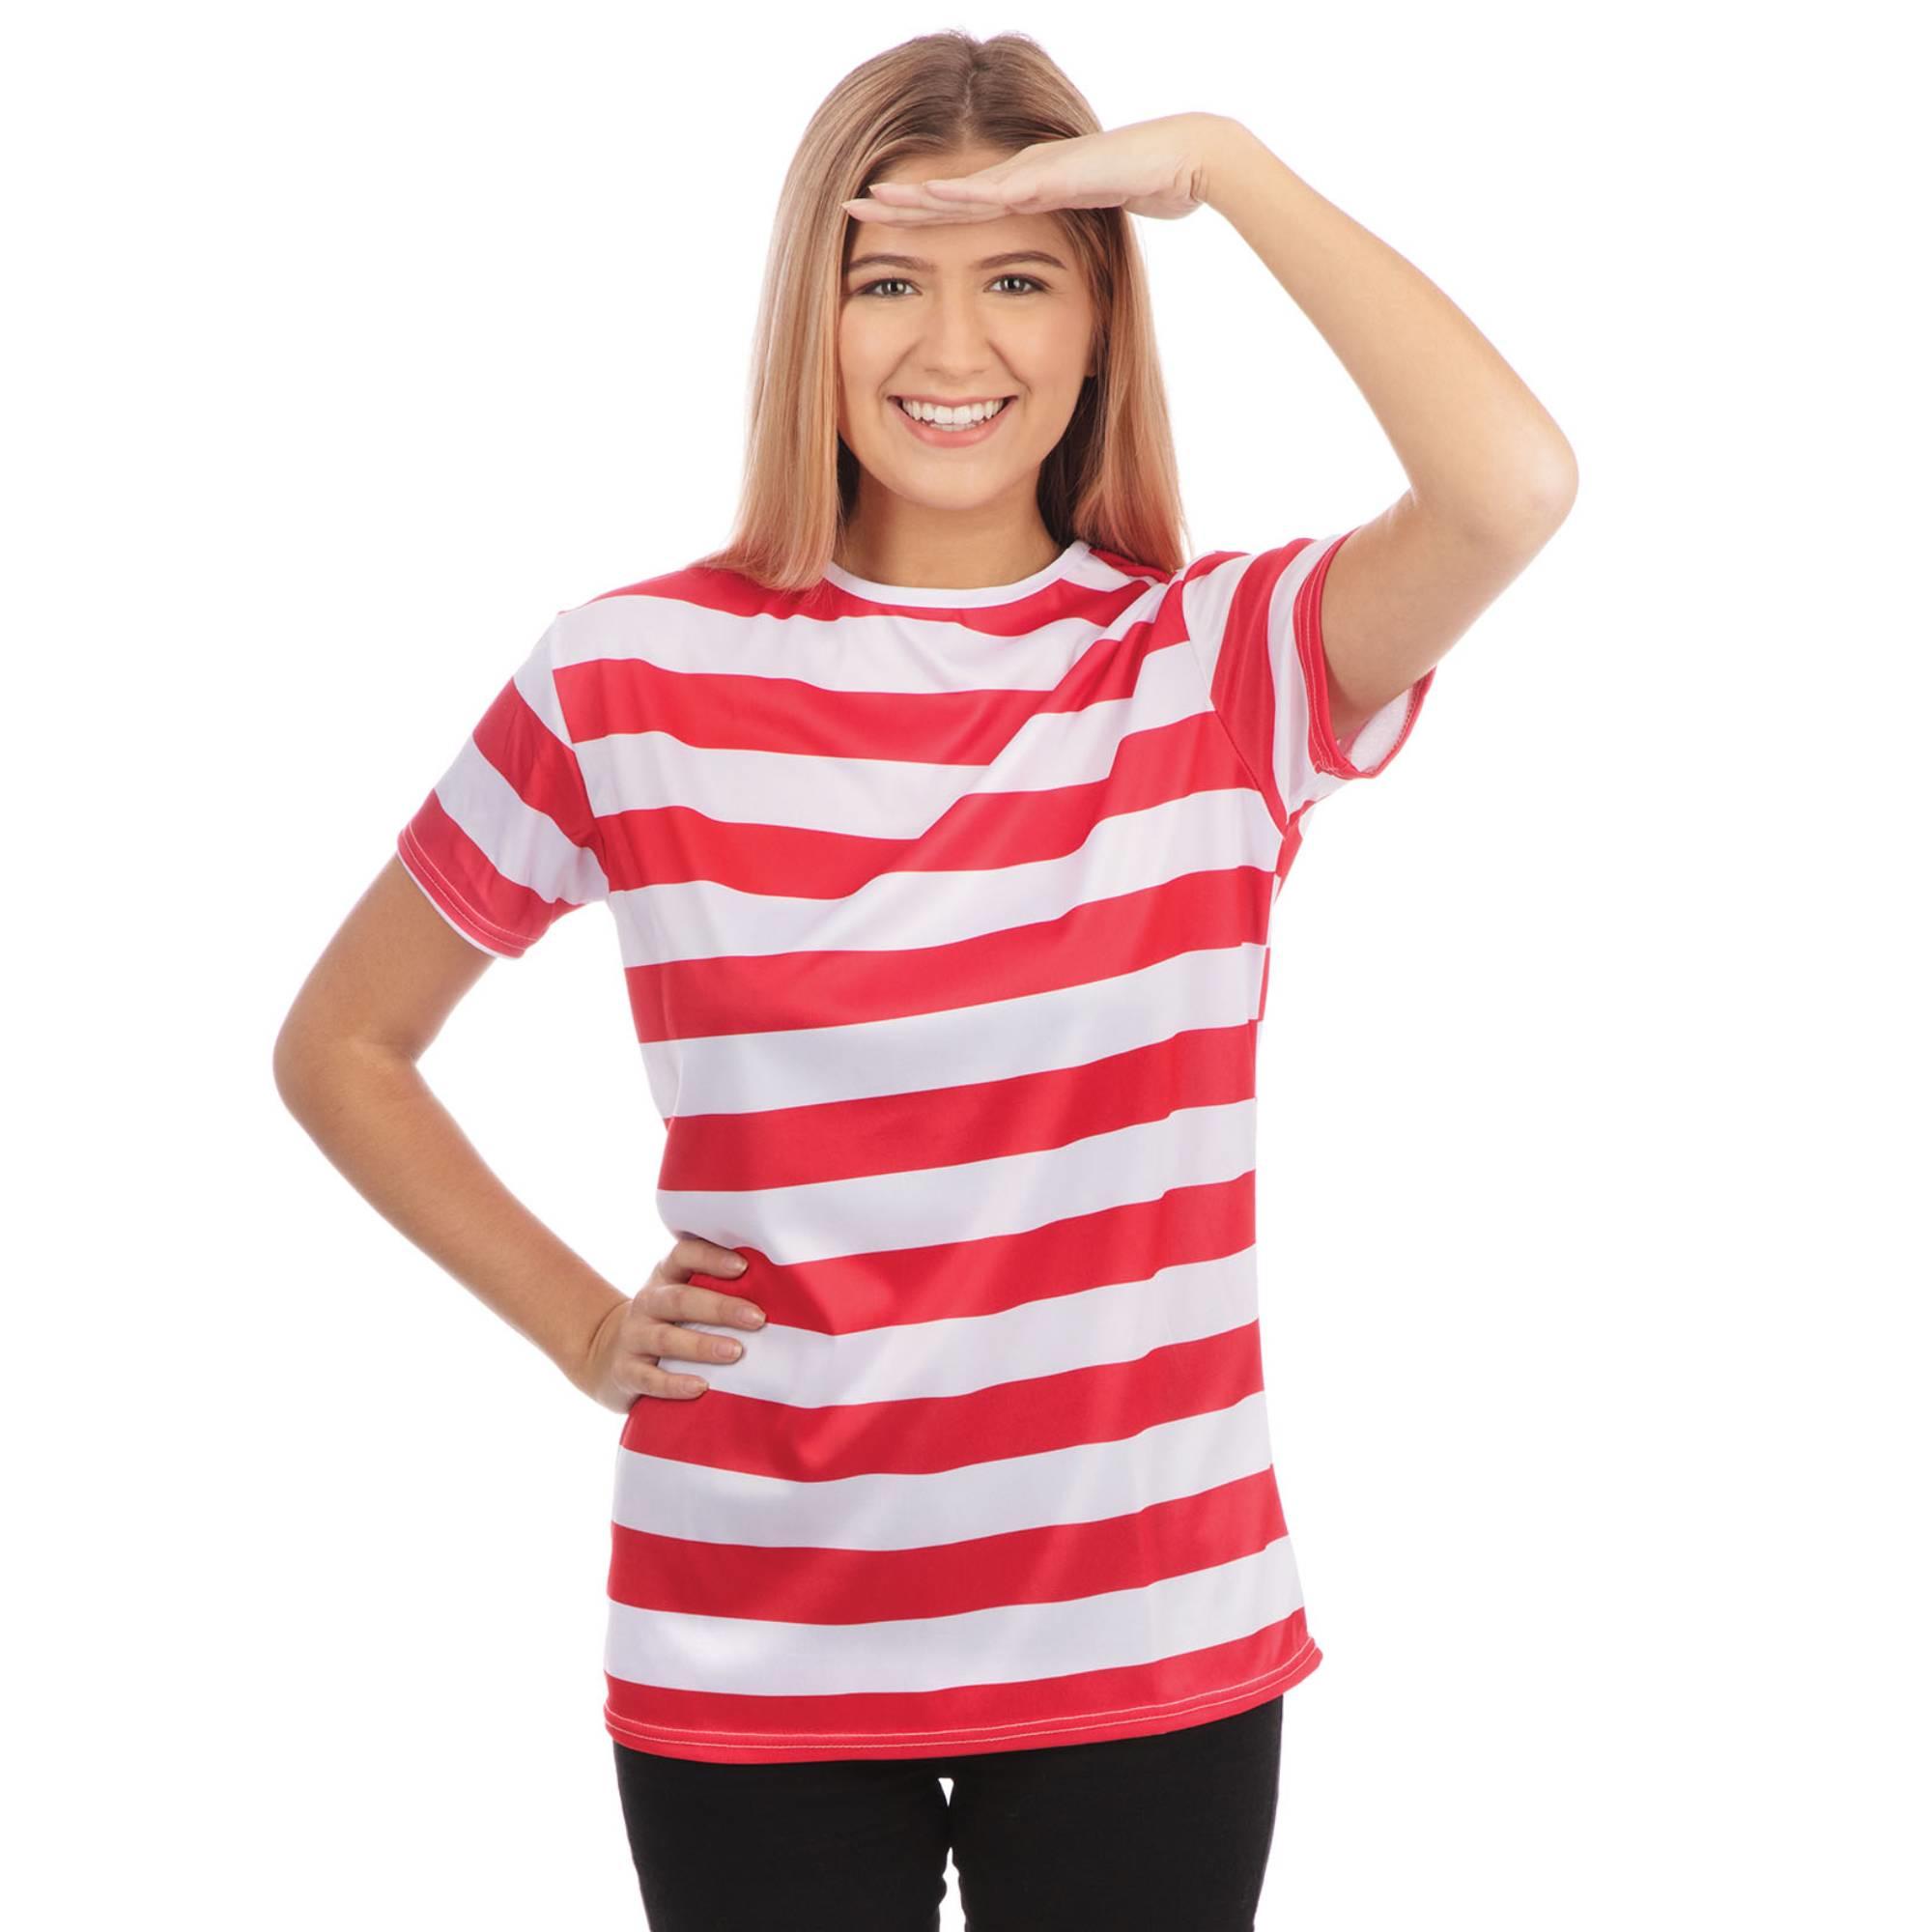 Lady's red and white striped top by Bristol Novs AC055 available here at Karnival Costumes online party shop